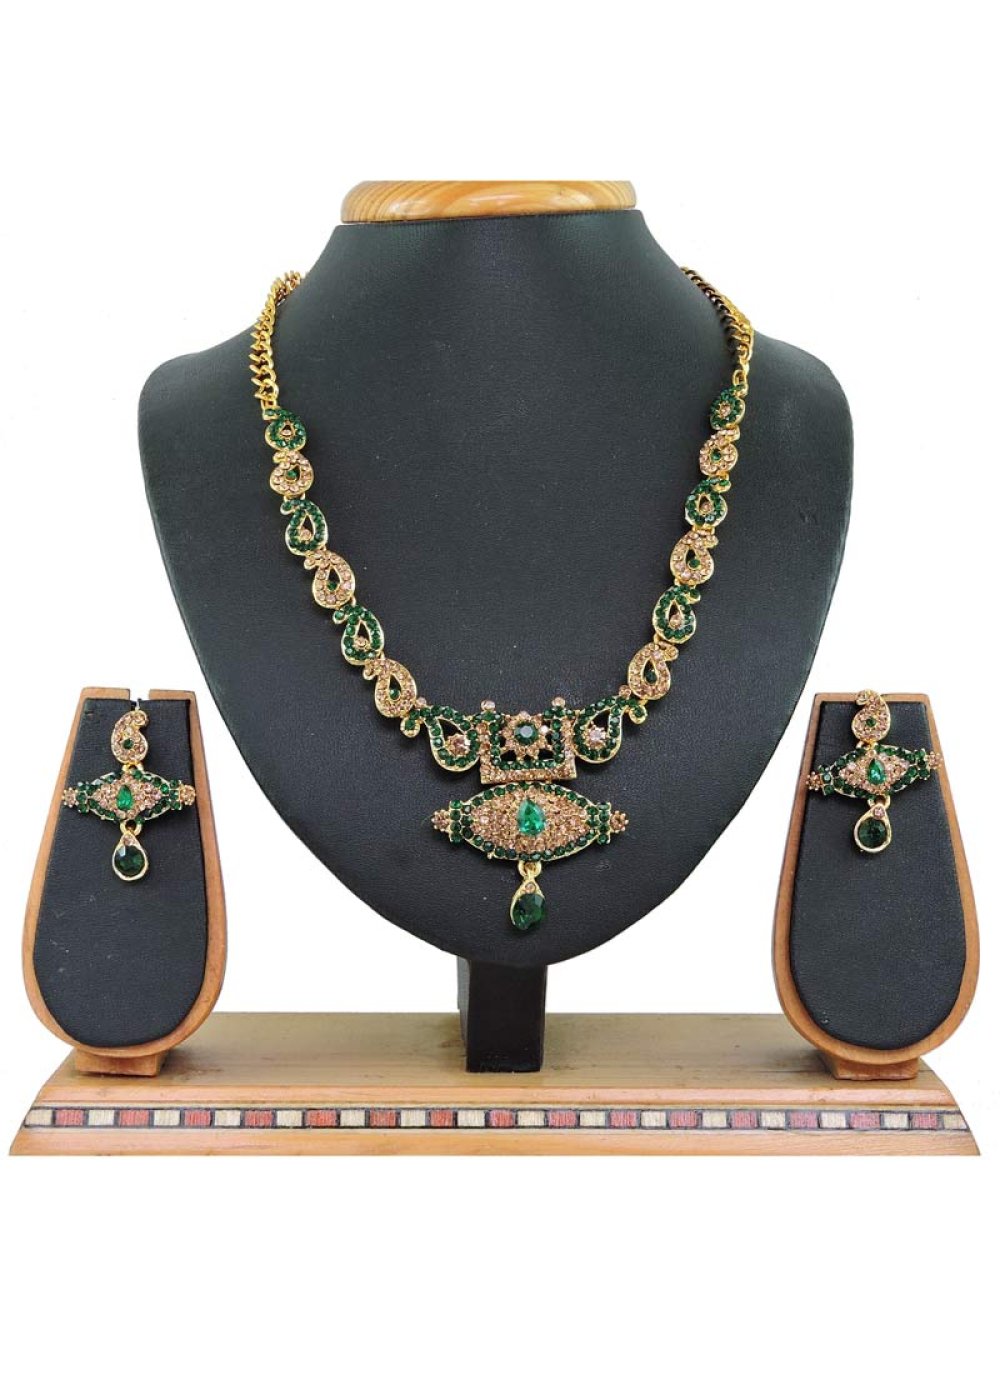 Sumptuous Beads Work Alloy Necklace Set For Ceremonial